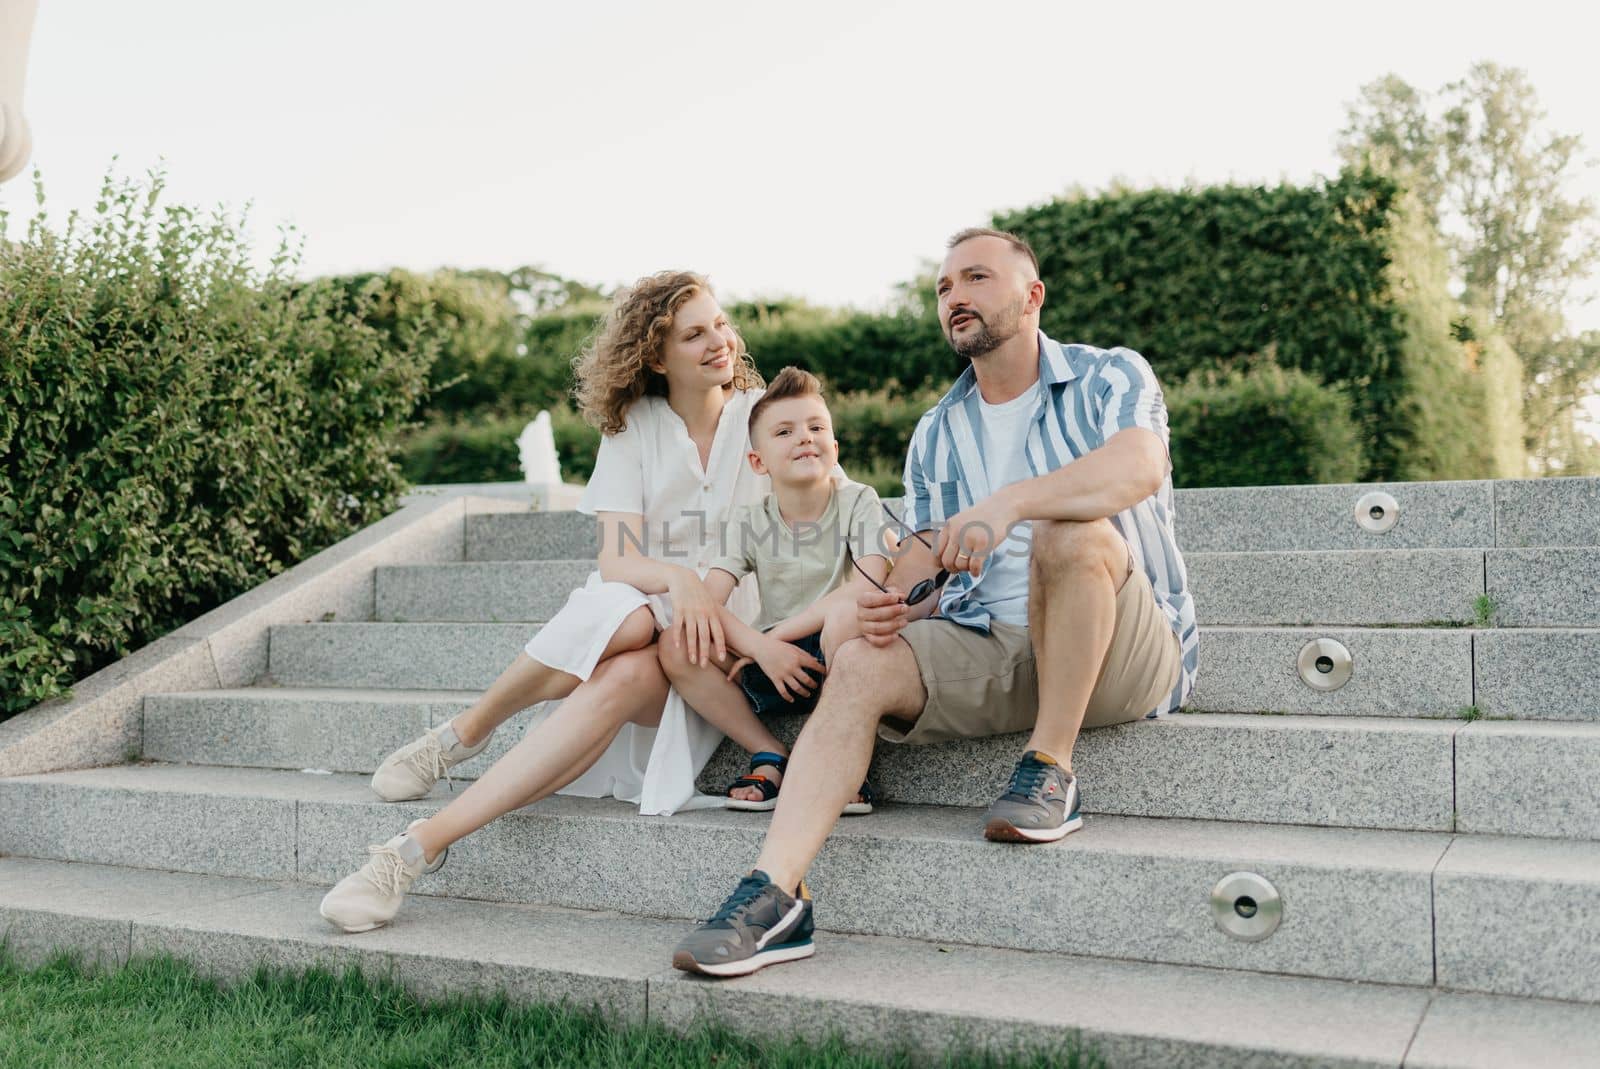 Father, mother, and son are sitting on the steps in the garden of an old European town. Happy family in the evening. Dad is discussing important themes with his smiling family in the park at sunset.